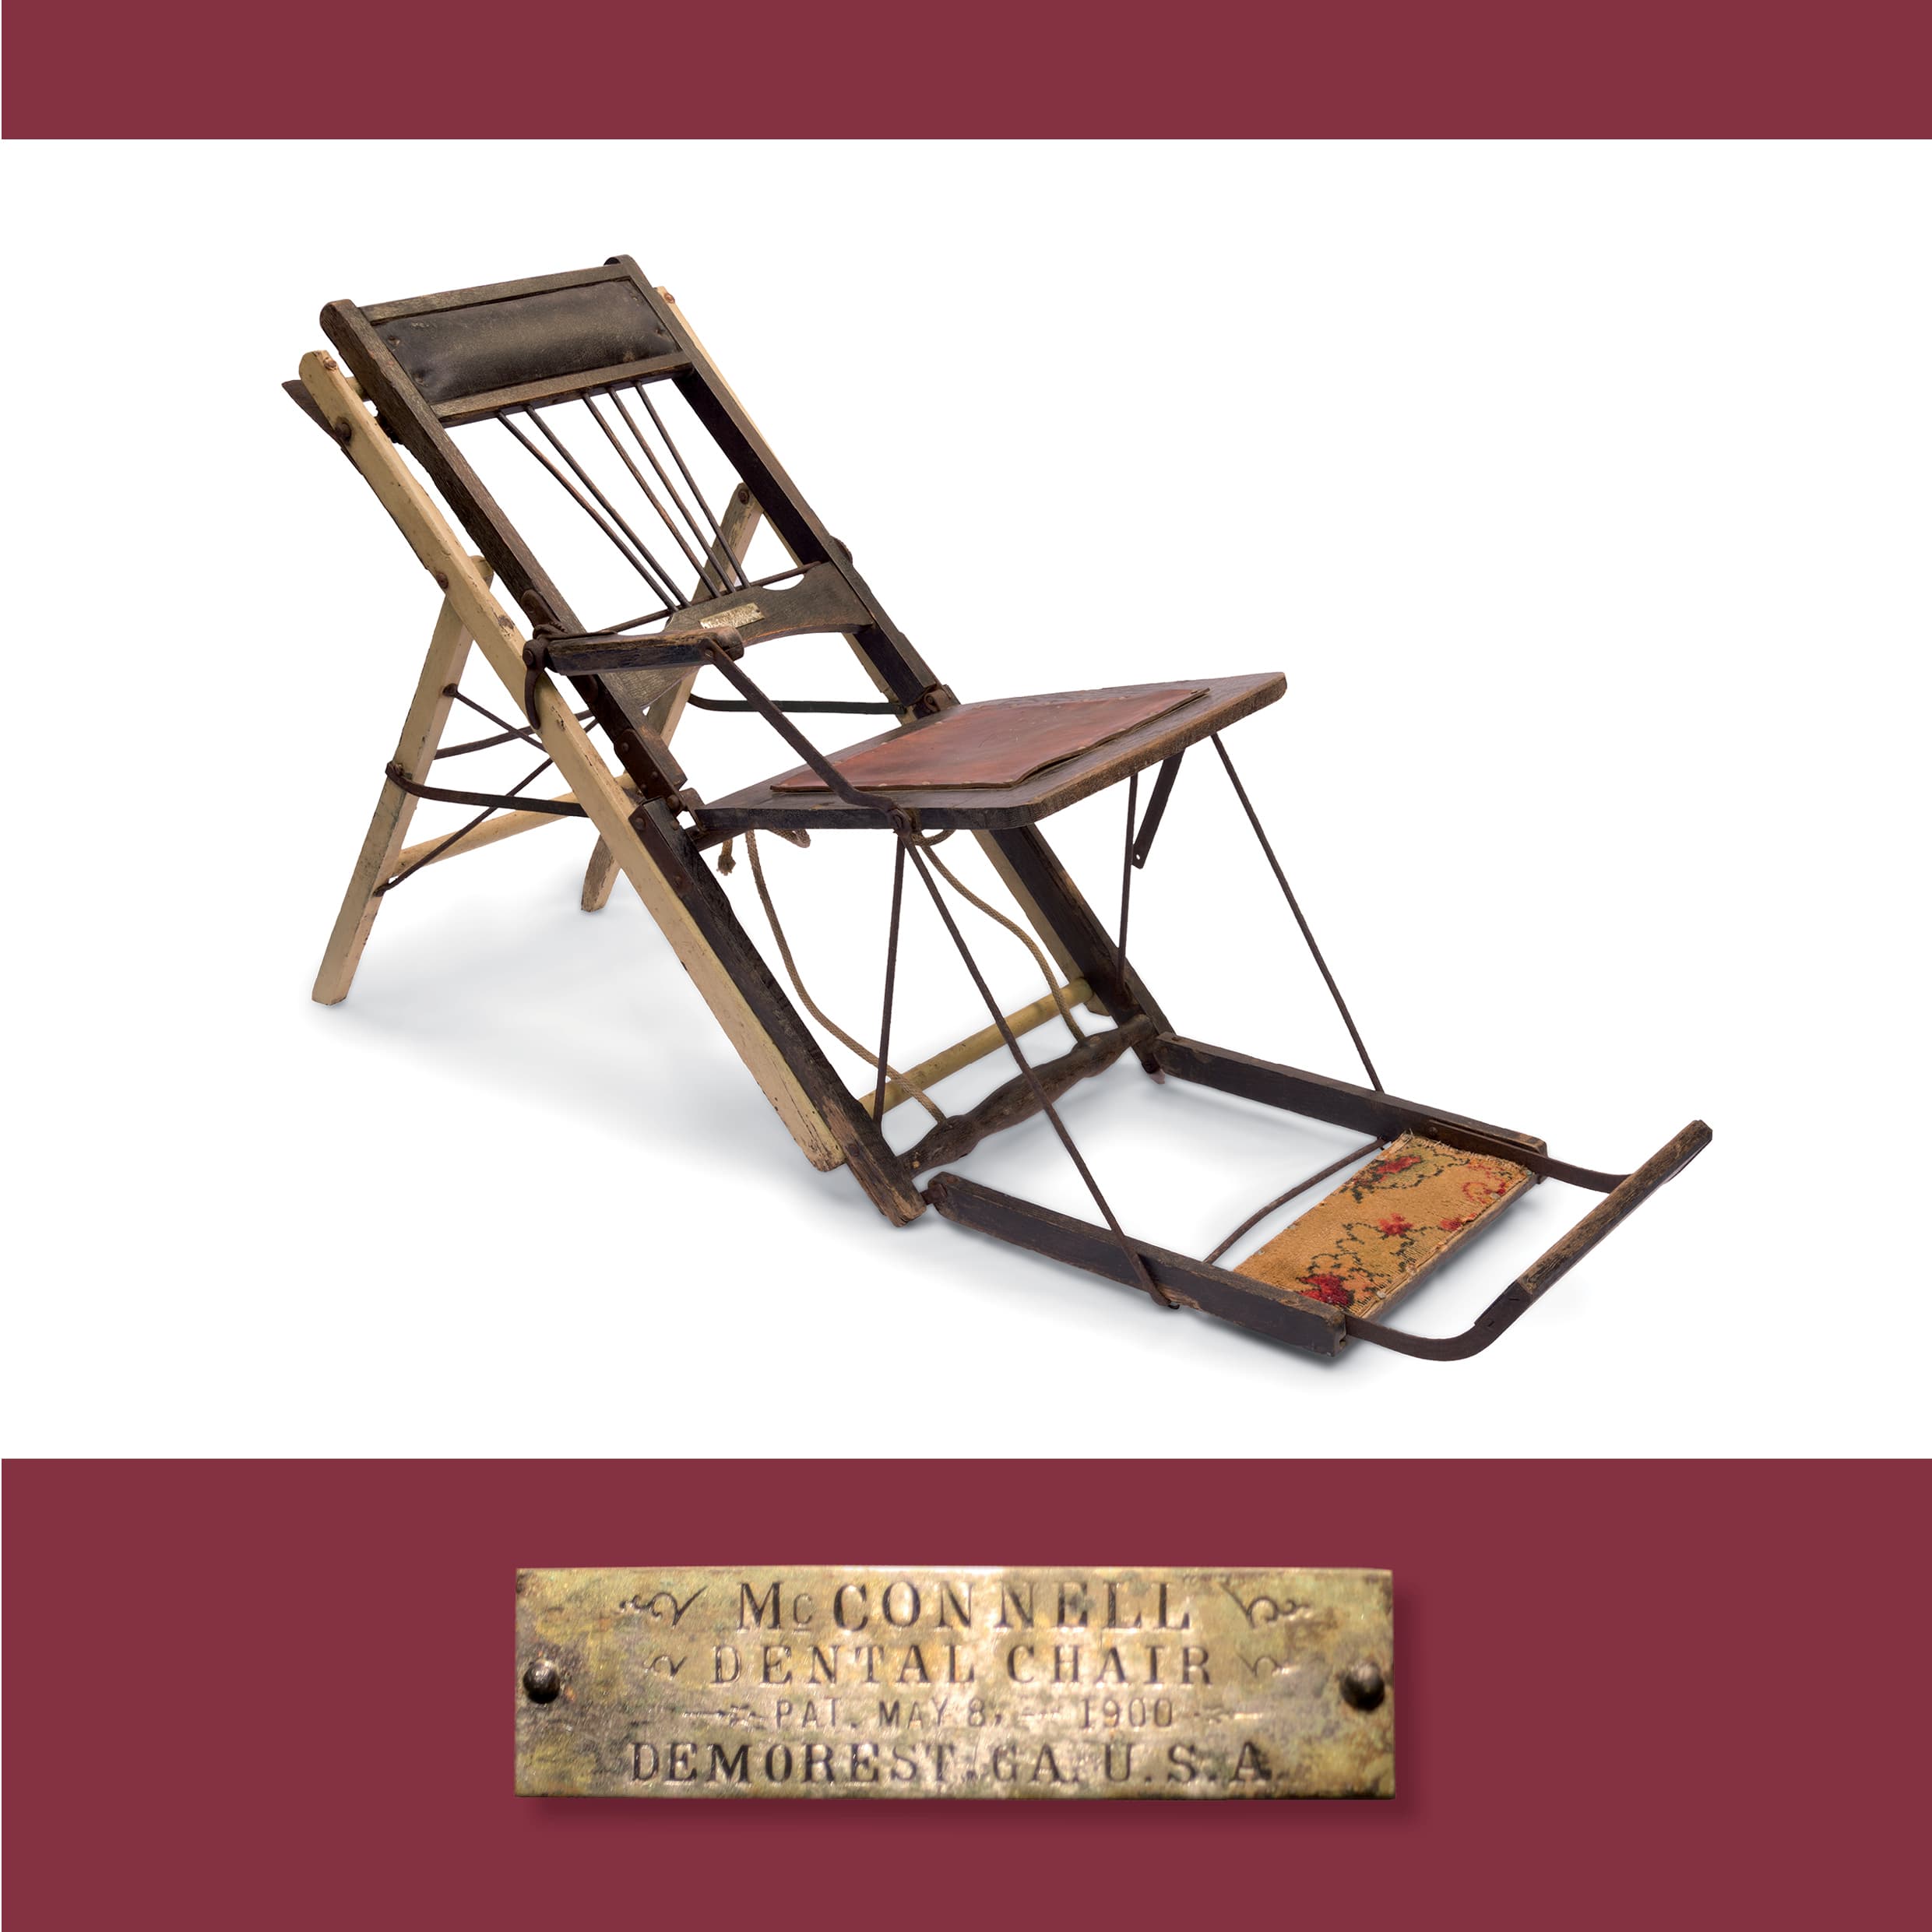 Southern Novelty Company (Demorest, Georgia, USA, est. 1899), McConnell portable dental chair, c. 1900, wood, leather, metal, fabric; 75.0 × 140.0 × 47.0 cm. HFADM 3651, acquired by Professor Henry Forman Atkinson, gift of David Atkinson and Mary White 2017, Henry Forman Atkinson Dental Museum, University of Melbourne. 